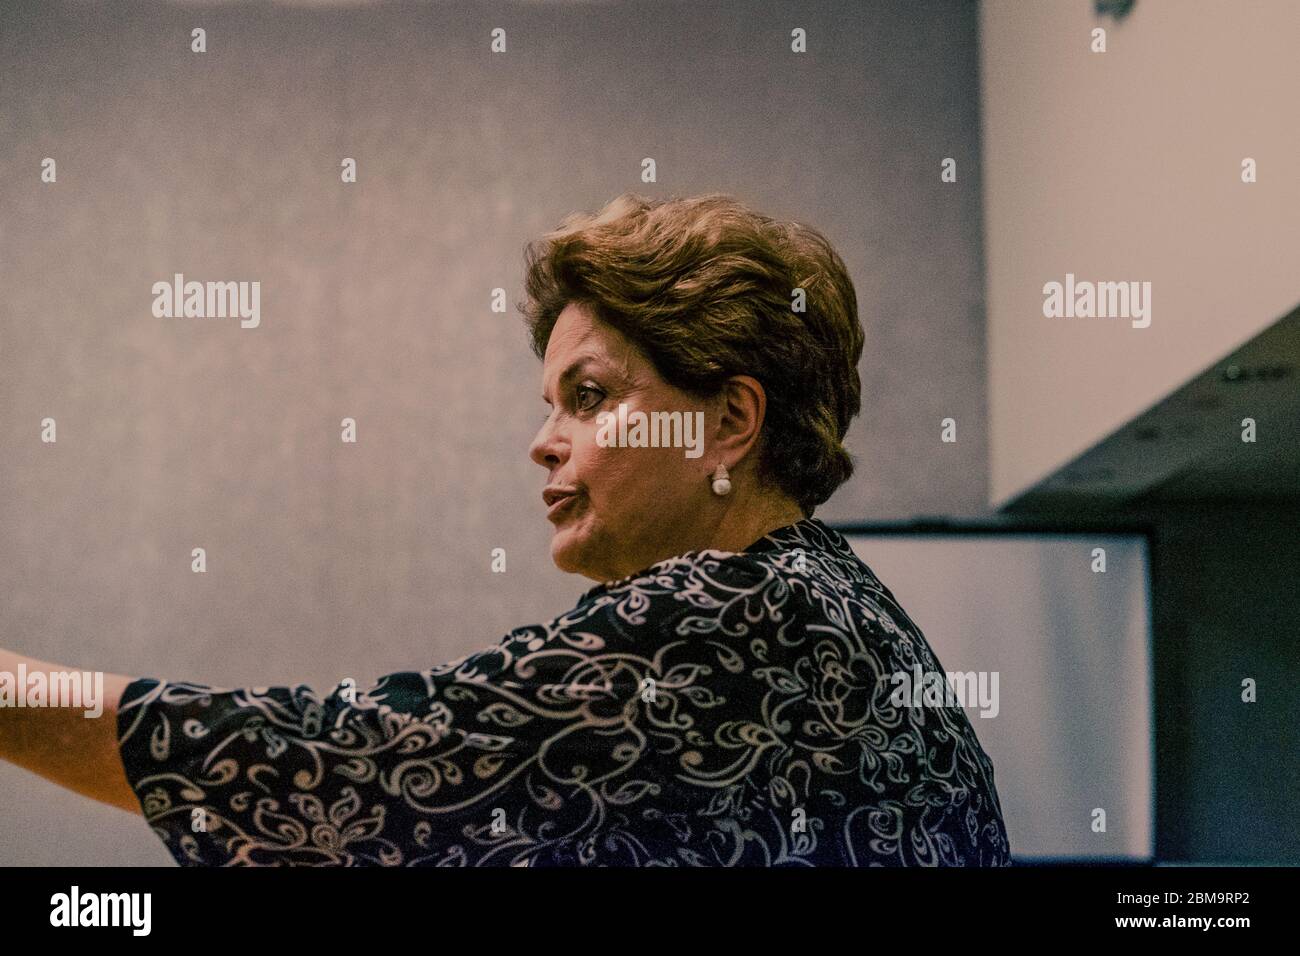 Former President of Brazil Dilma Rousseff during an interview in London, UK. Stock Photo